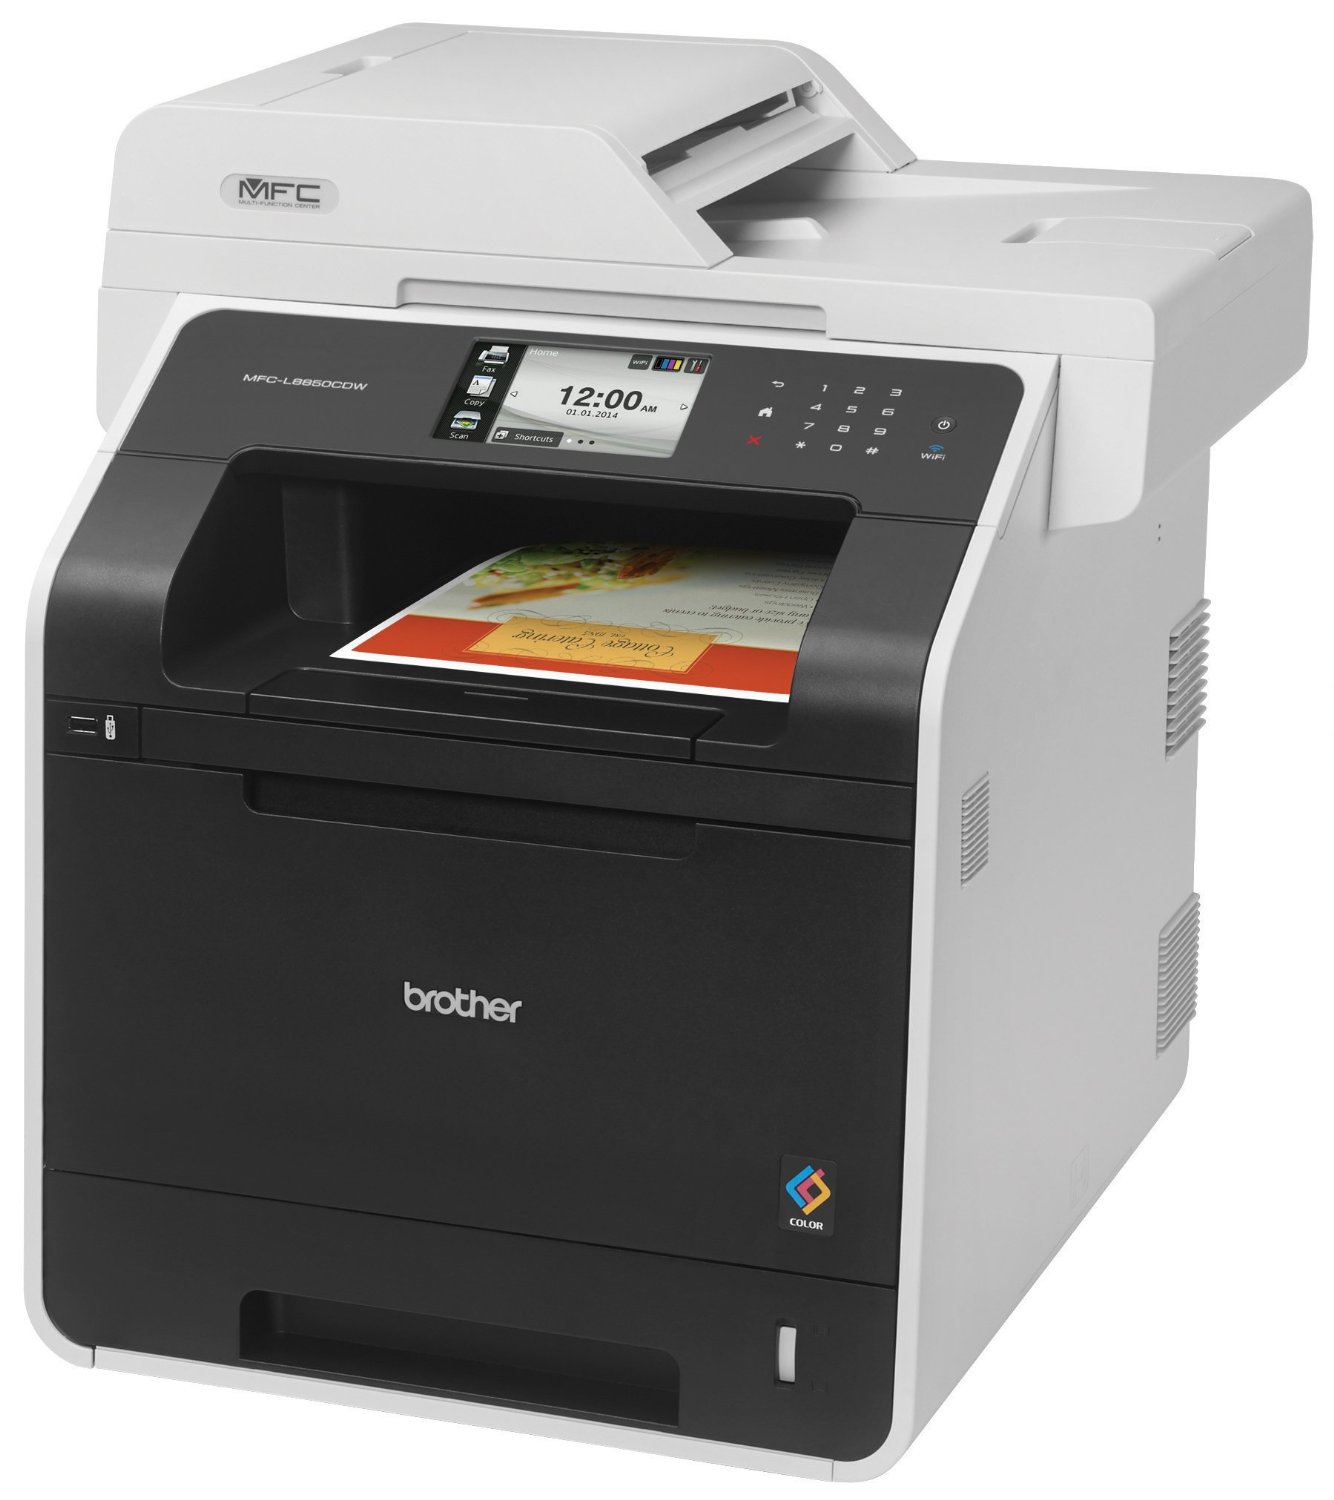 Brother Printer MFC-L8850CDW Wireless Color Laser Printer with Scanner, Copier and Fax, Amazon Dash Replenishment Enabled